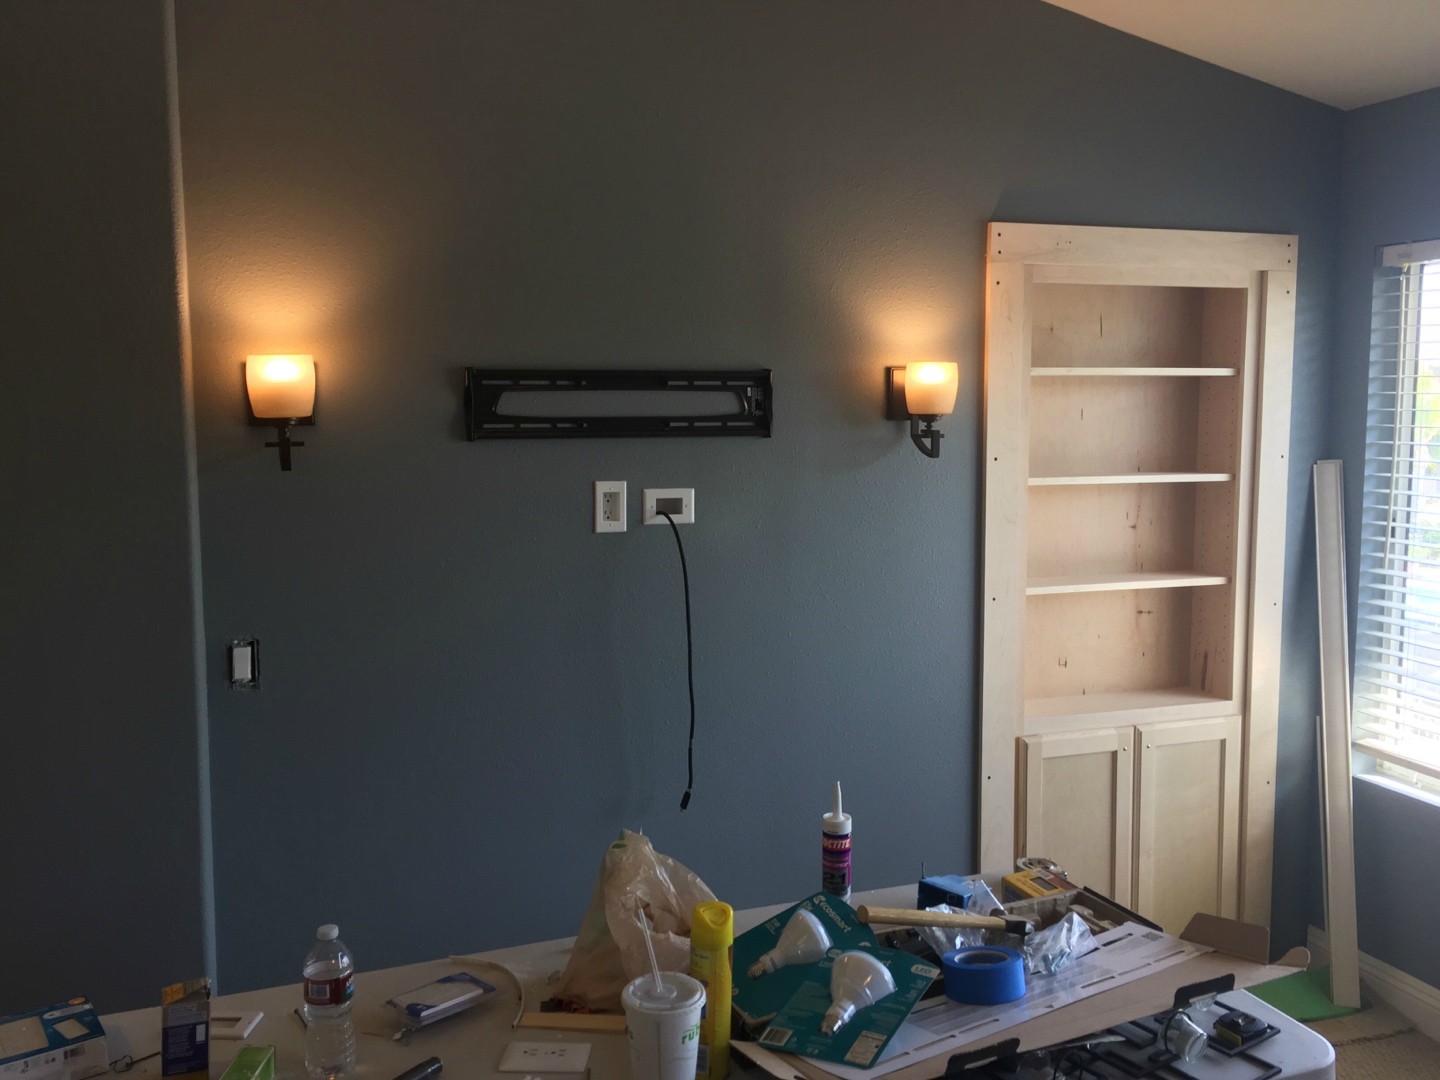 A bit of a paint job and the wall is pretty much done. What you need is a secret passage door disguised as a shelf.